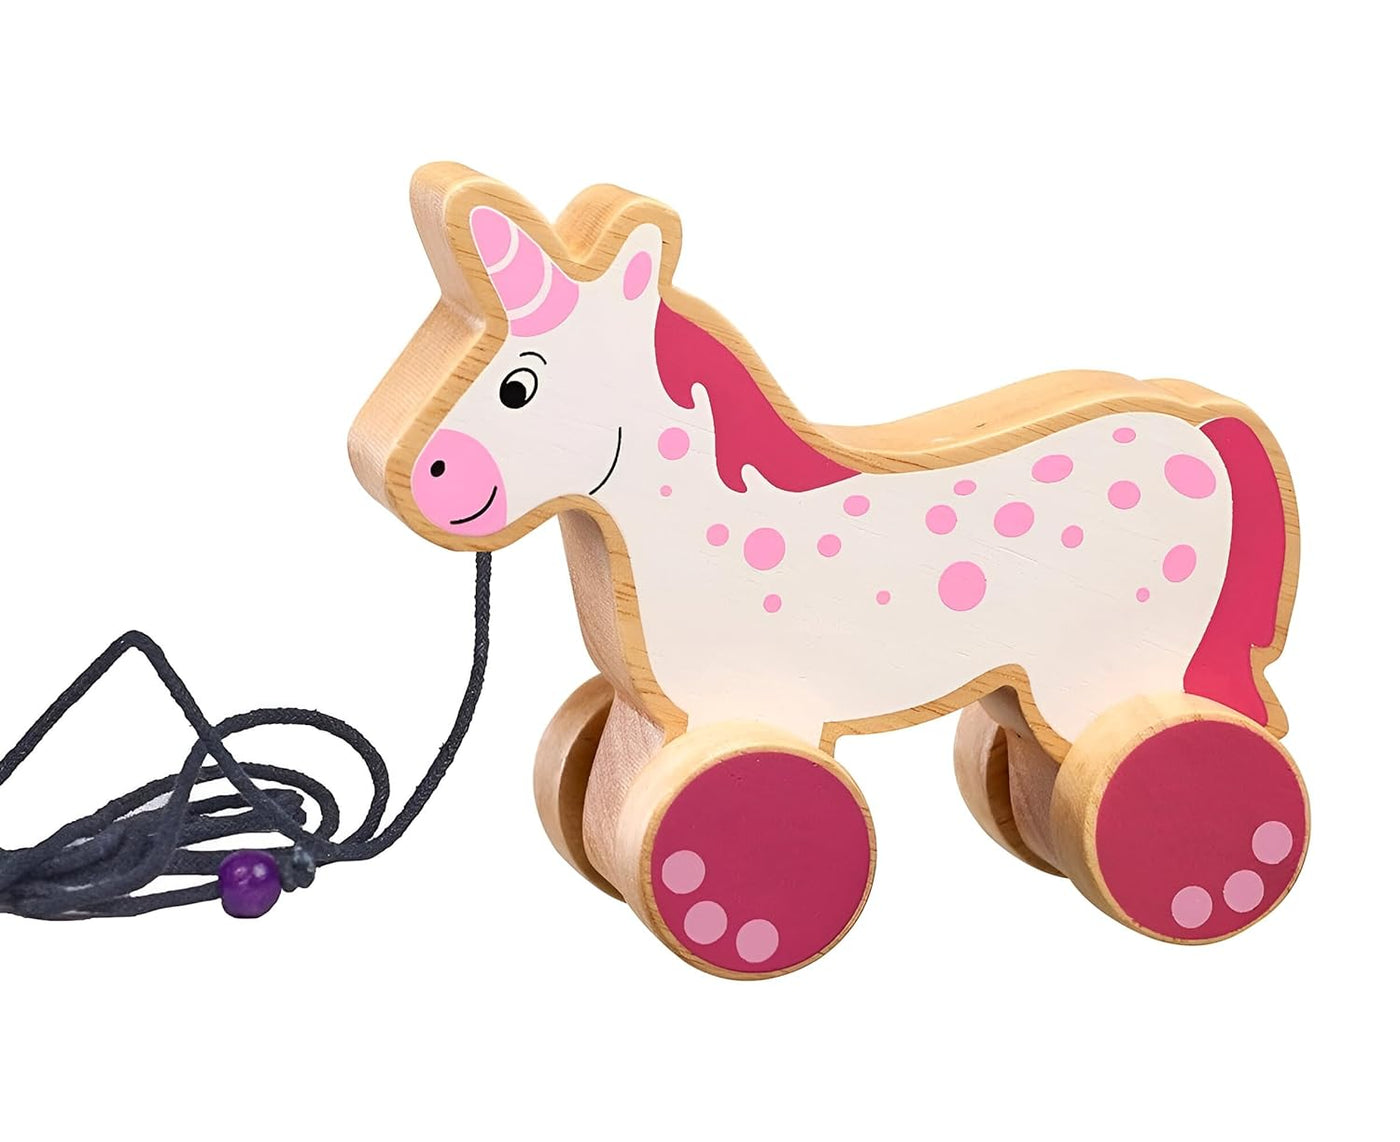 Premium Pull Along Toy Wooden Unicorn for 12 Months & Above Kids, Toddlers, Infant & Preschool Toys - Multicolor - with Attached String- Encourage Walking